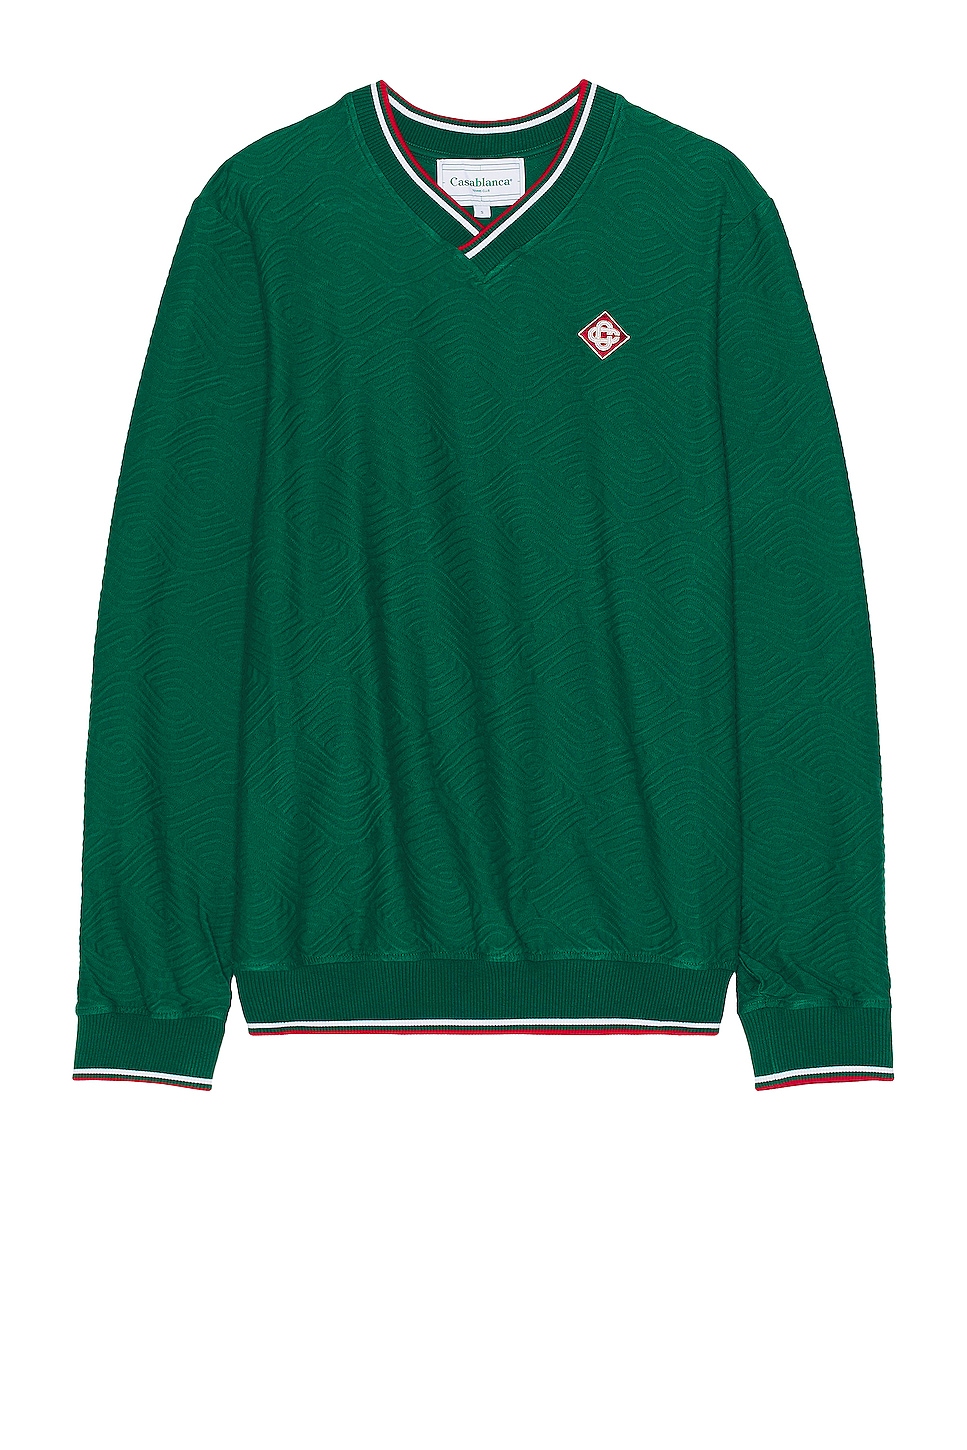 Image 1 of Casablanca 3d Wave Sweater in Green